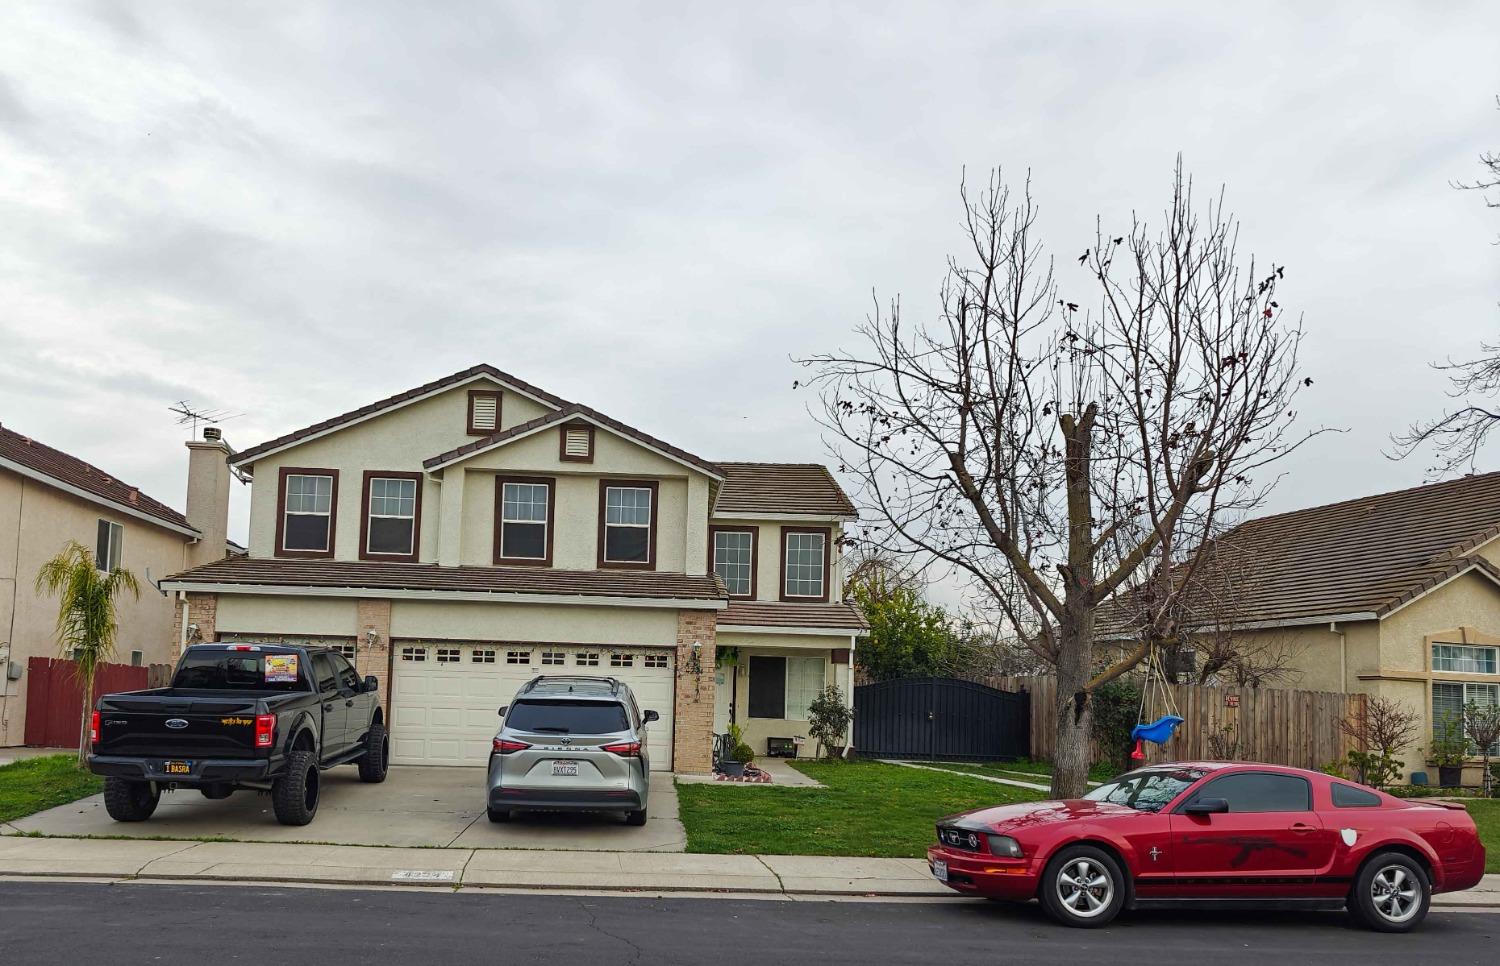 Photo of 4224 Brodie Wy in Stockton, CA